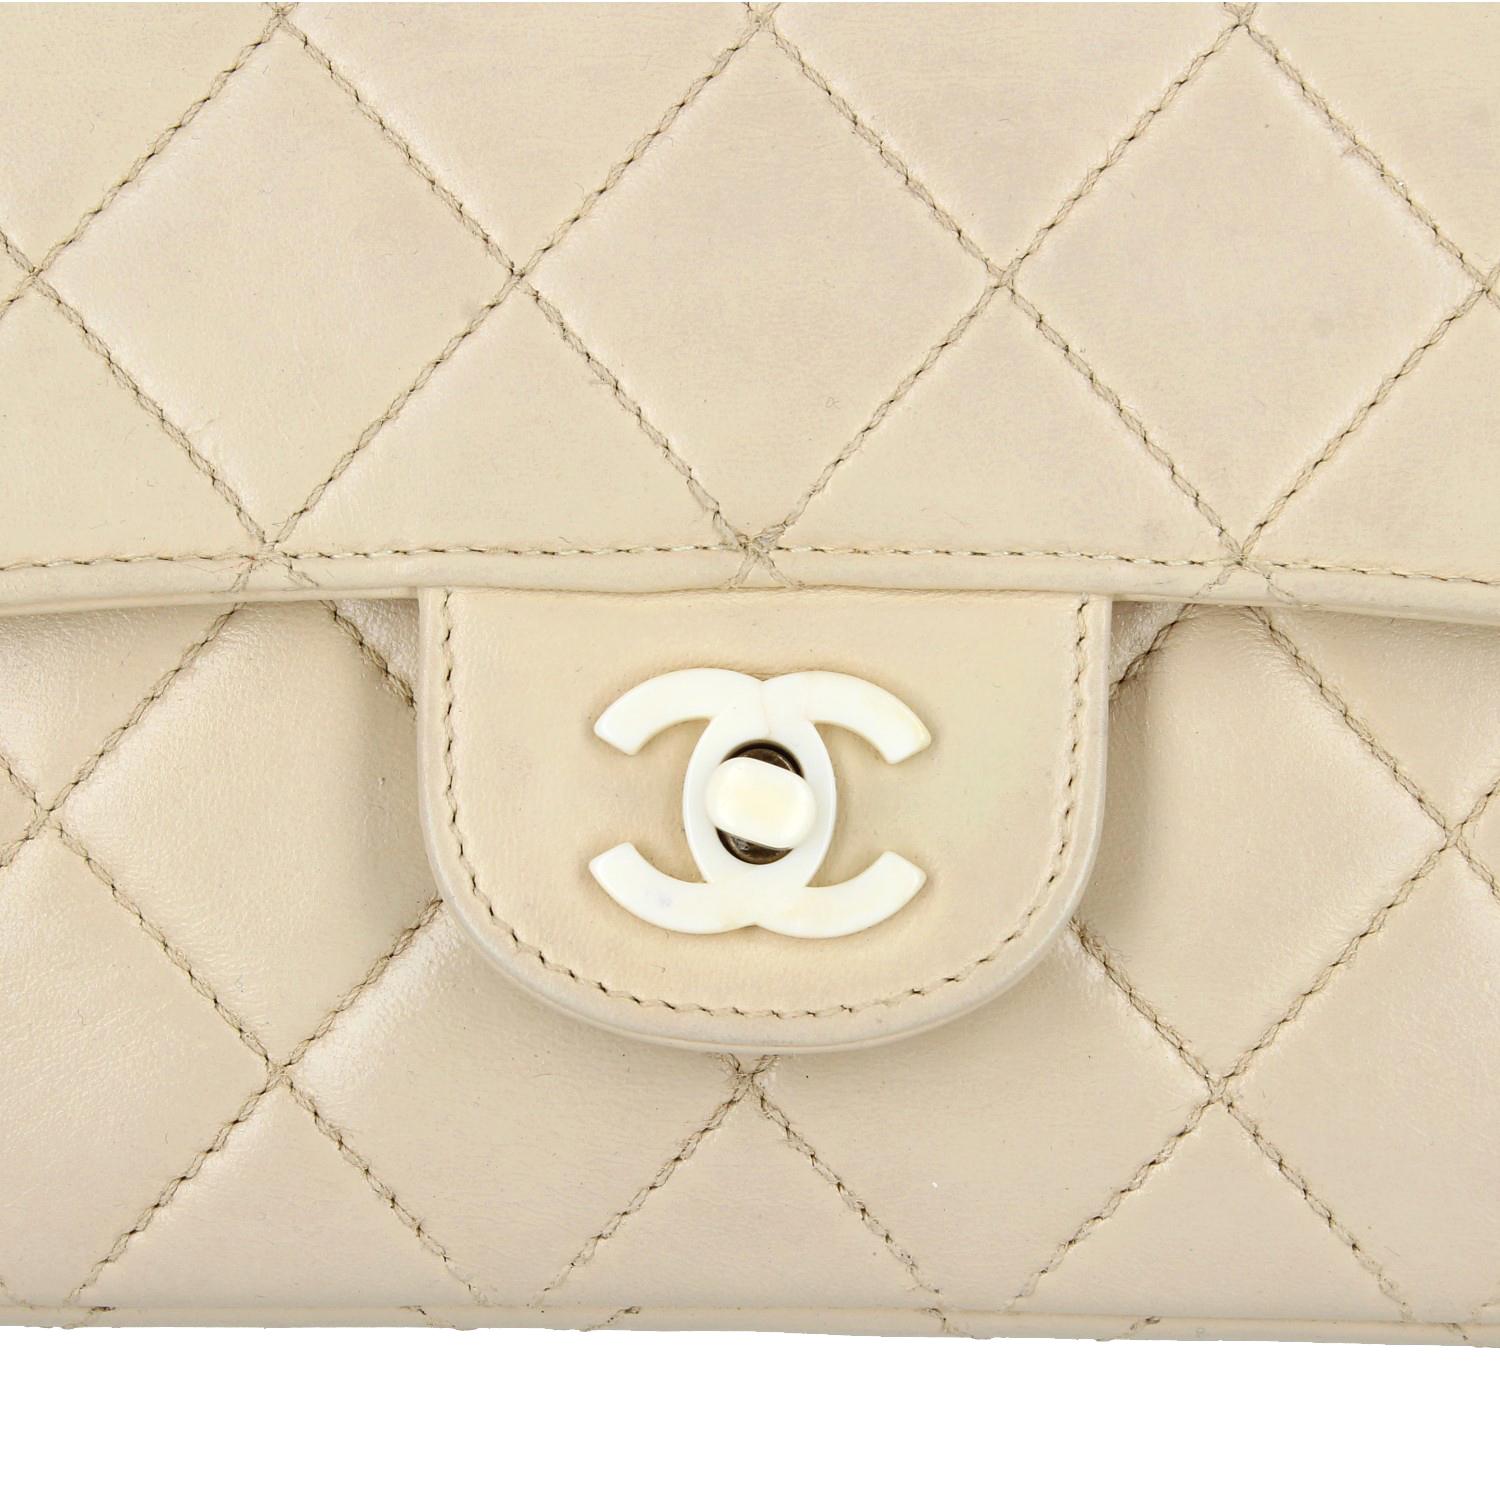 1990s Chanel beige leather bag  10